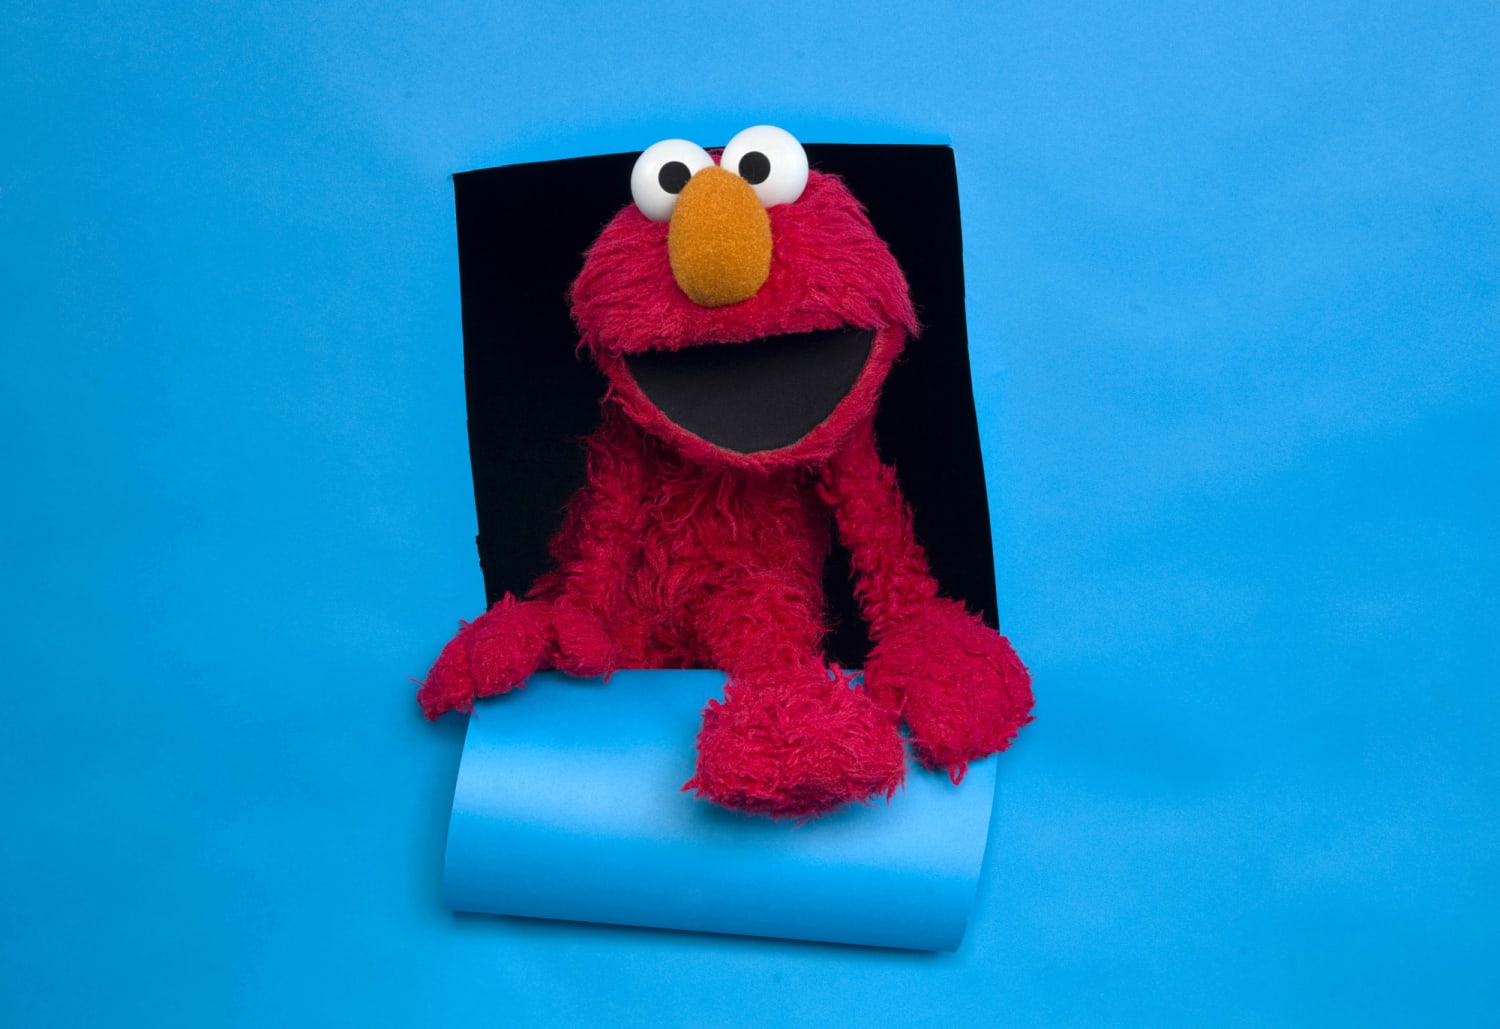 Elmo’s feud with a pet rock has consumed the internet